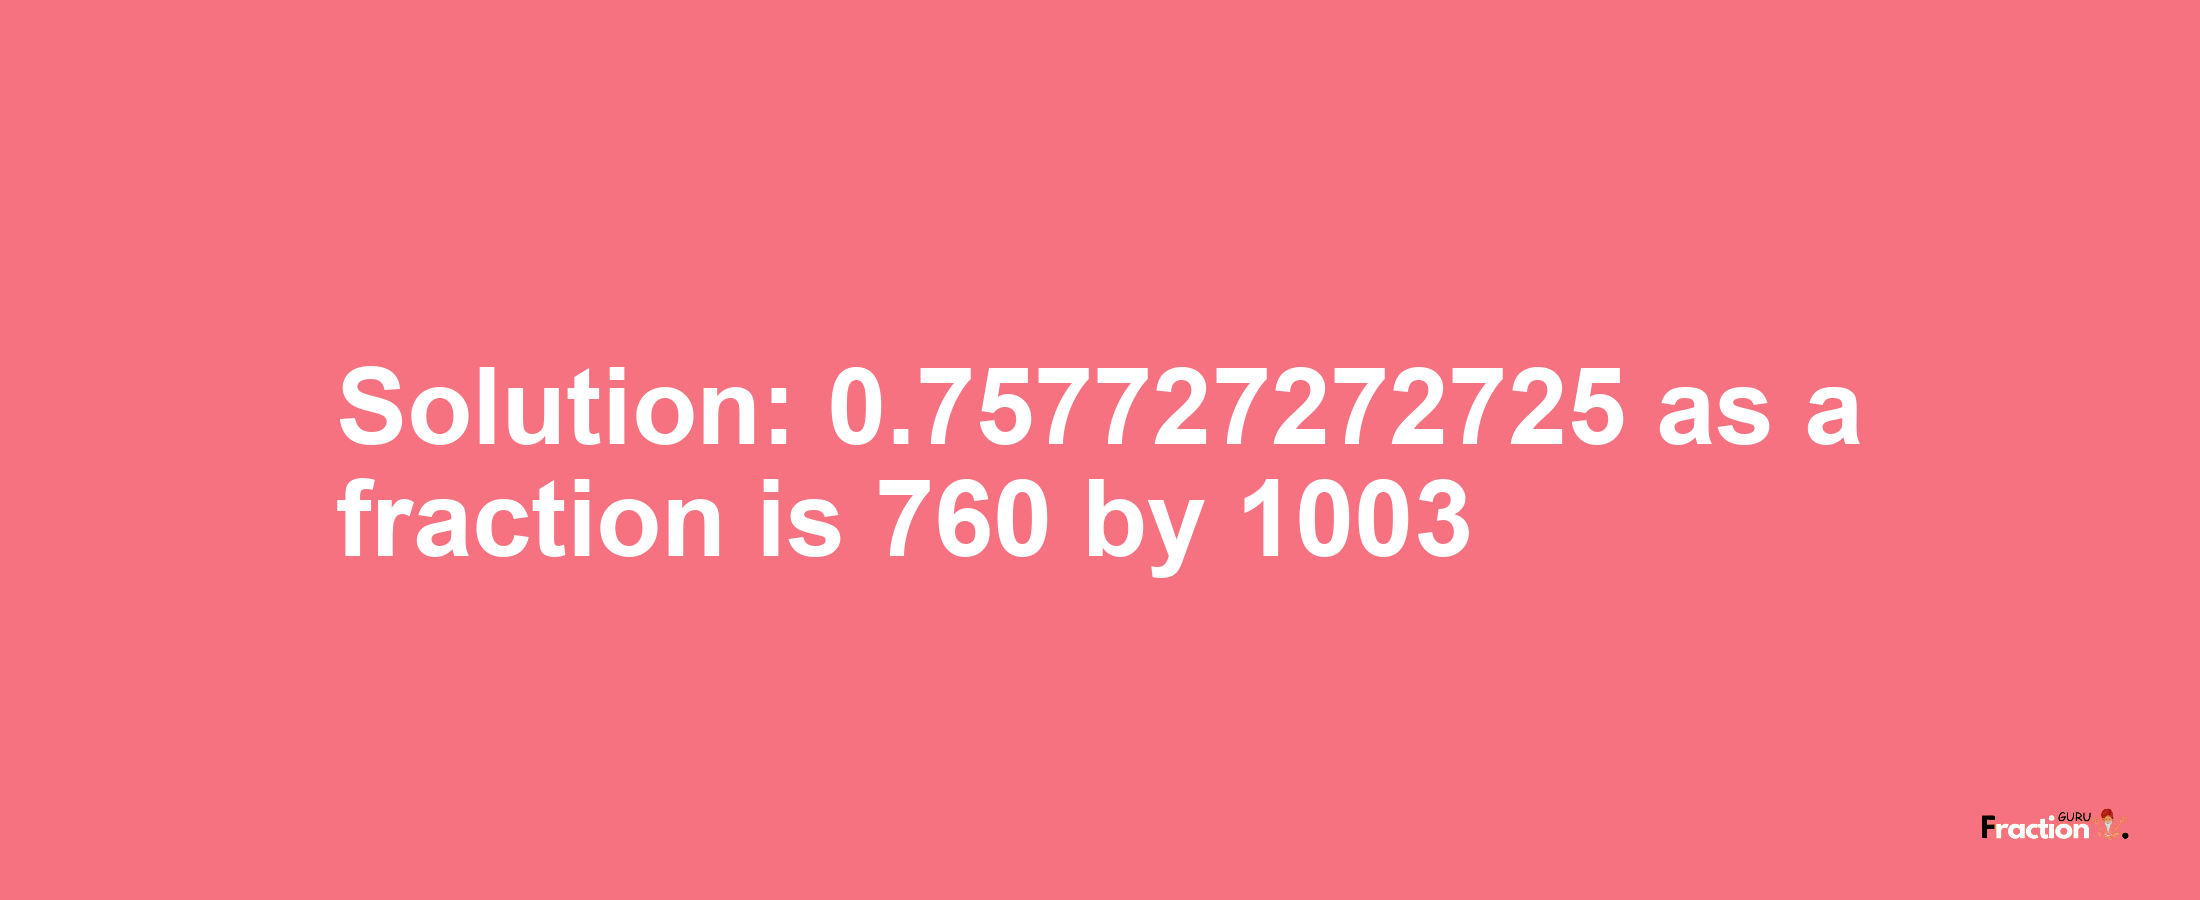 Solution:0.757727272725 as a fraction is 760/1003